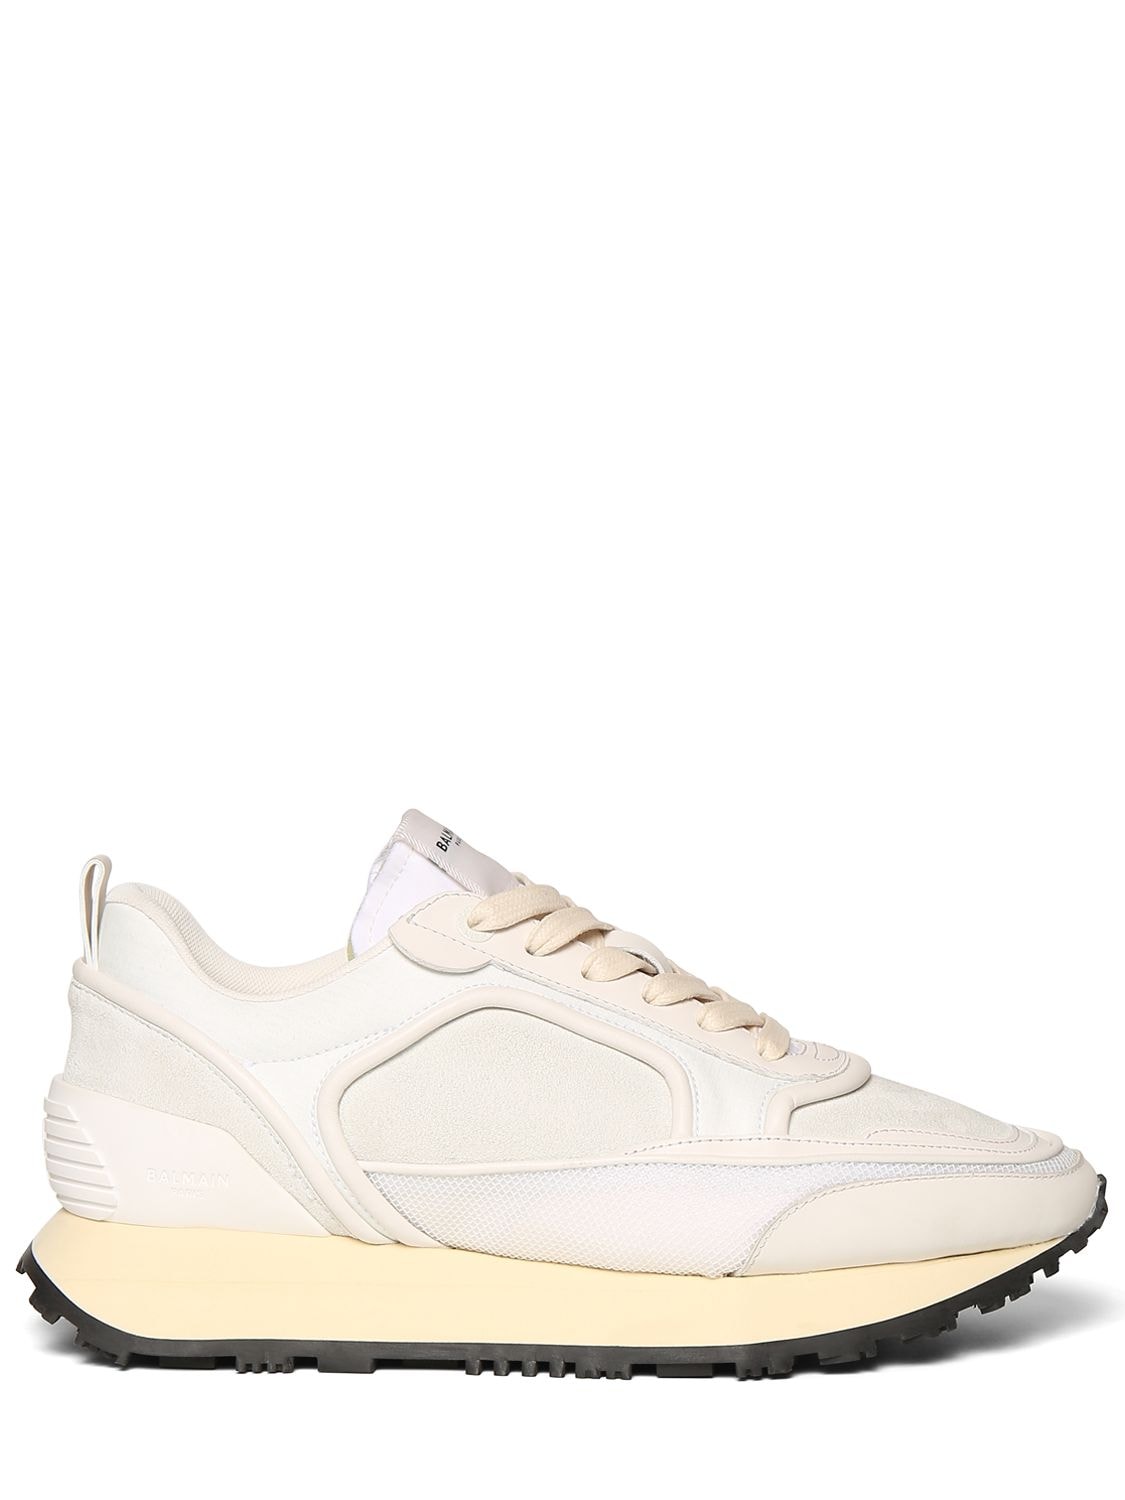 Balmain 35mm Racer Suede & Leather Sneakers In White | ModeSens